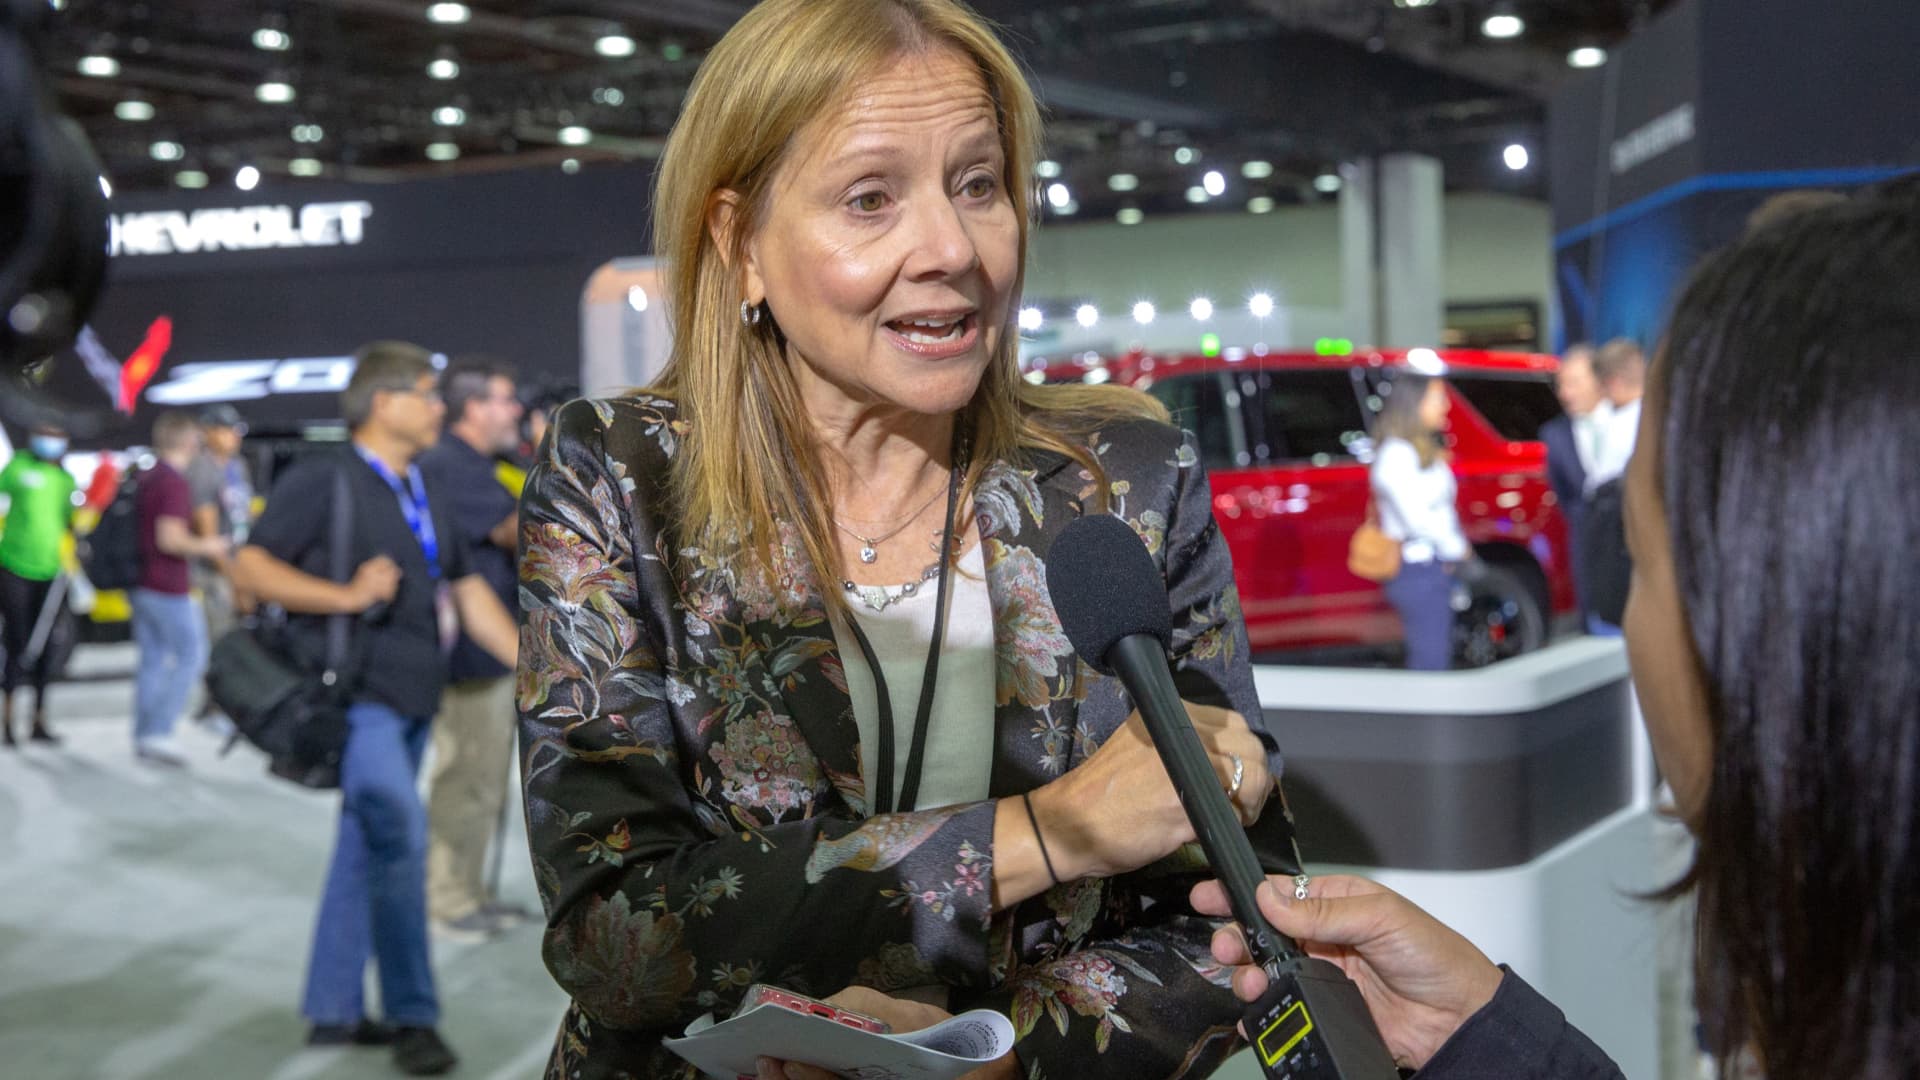 General Motors CEO Mary Barra speaks to reporters while she waits for the arrival of President Joe Biden at media day of the North American International Auto Show in Detroit, Michigan, September 14, 2022.